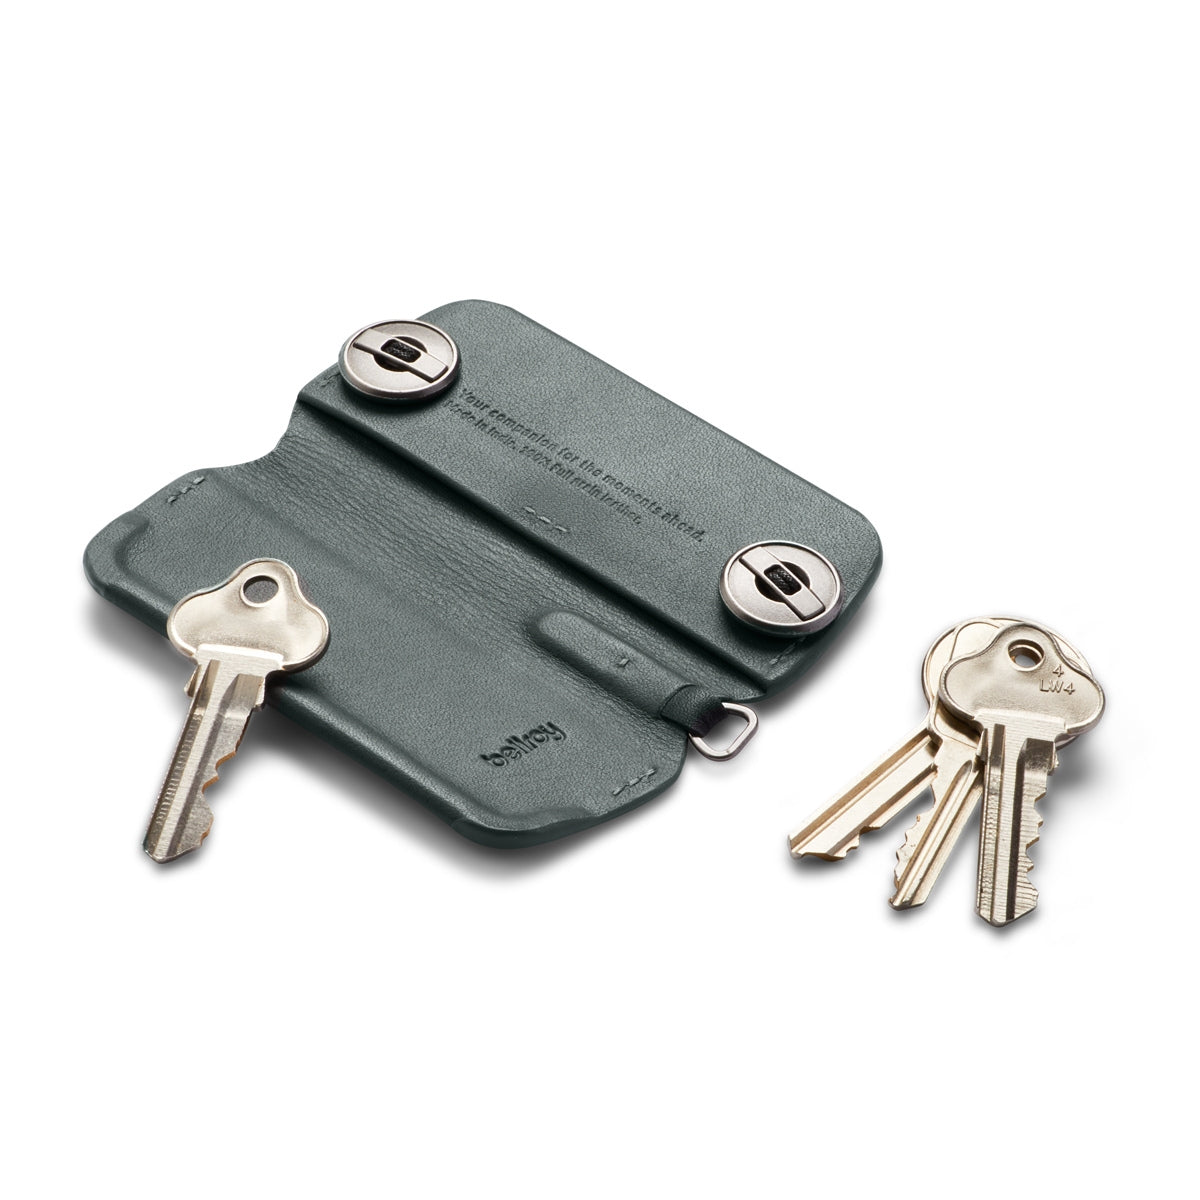 Bellroy Key Cover Plus (Third Edition) in Evergreen